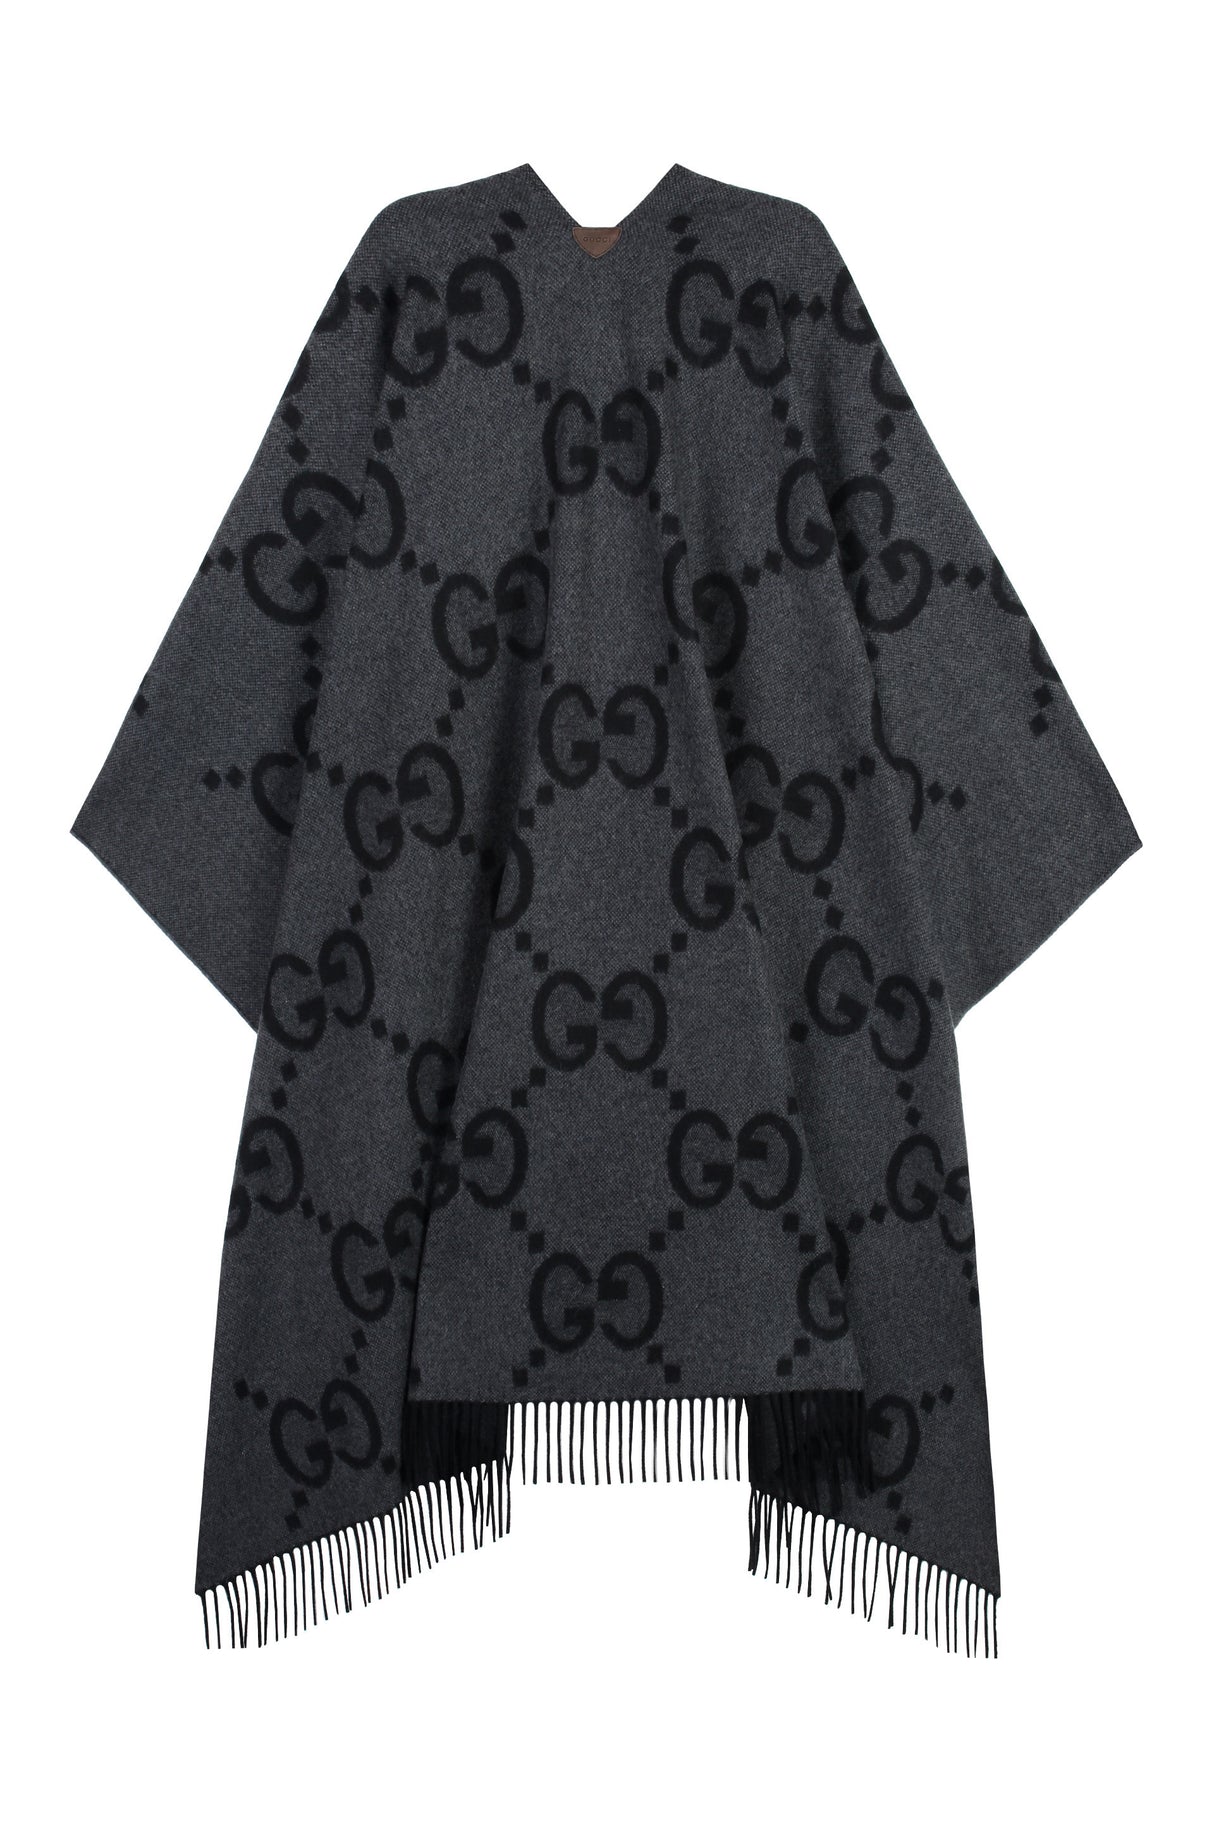 GUCCI Reversible Gray Cashmere Poncho with Leather Details for Women